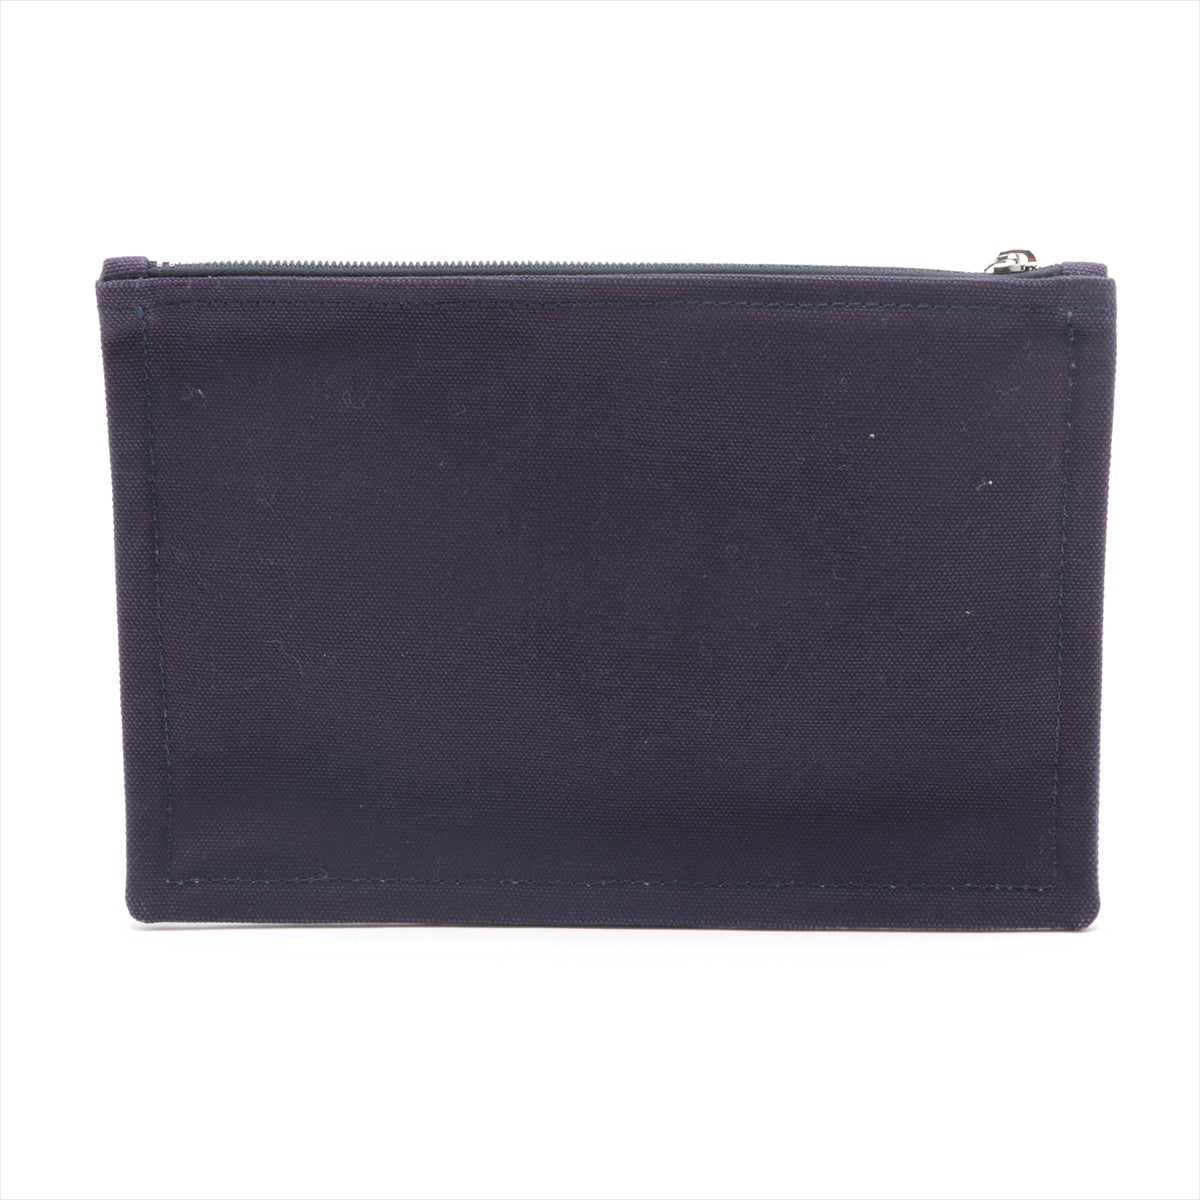 Hermès Yachting Flat PM canvas Pouch Purple Silver Metal fittings